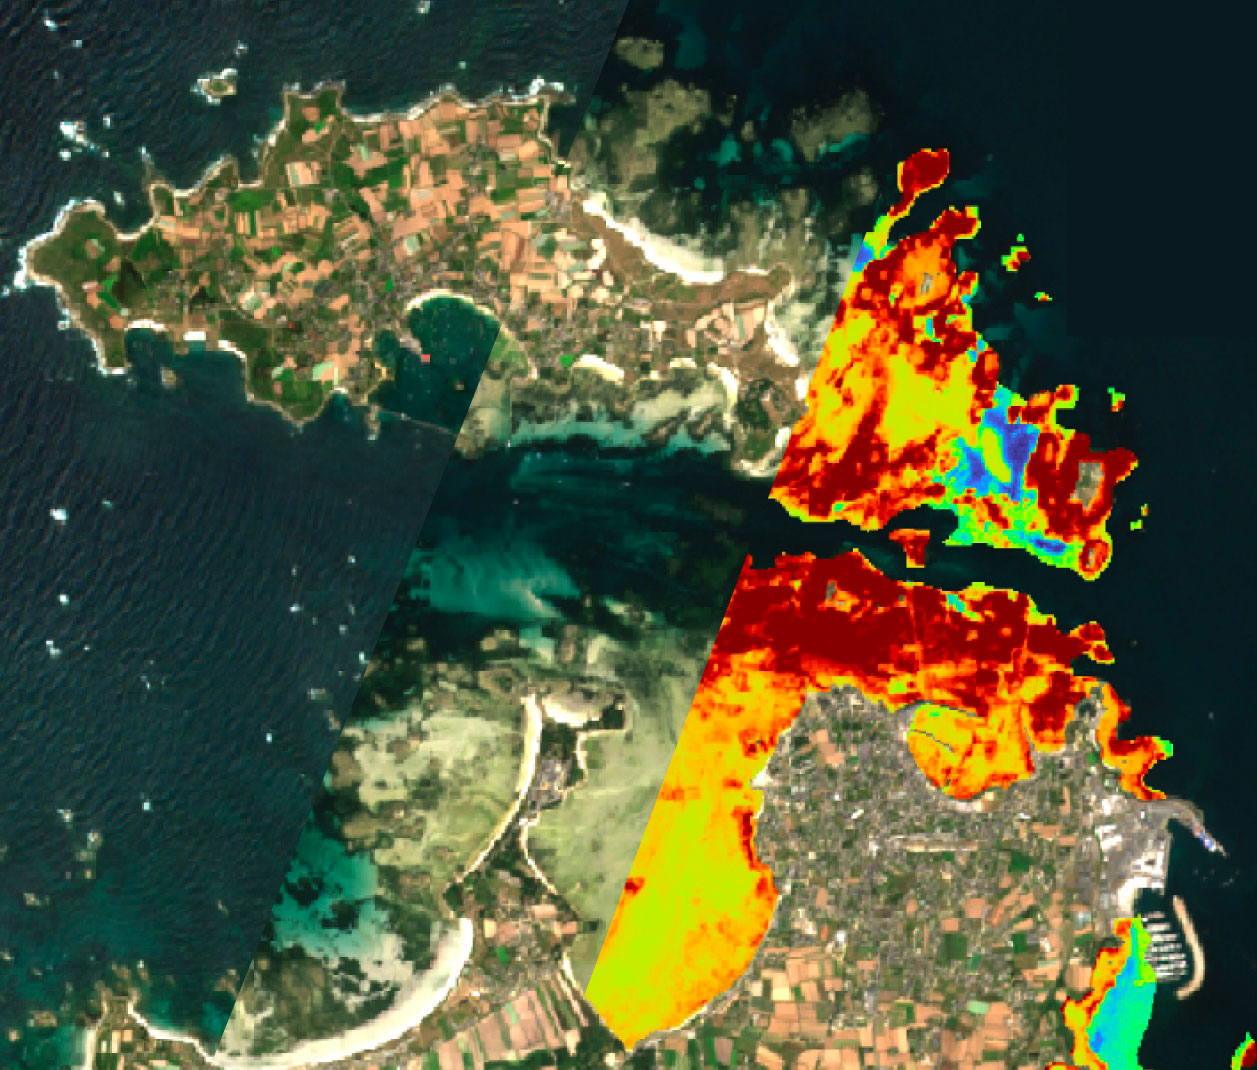 Overview of LITTOSAT satellite products: mosaics of high tide, low tide, and vegetation index images over the Littoral (Roscoff and Ile de Batz, Brittany, France).